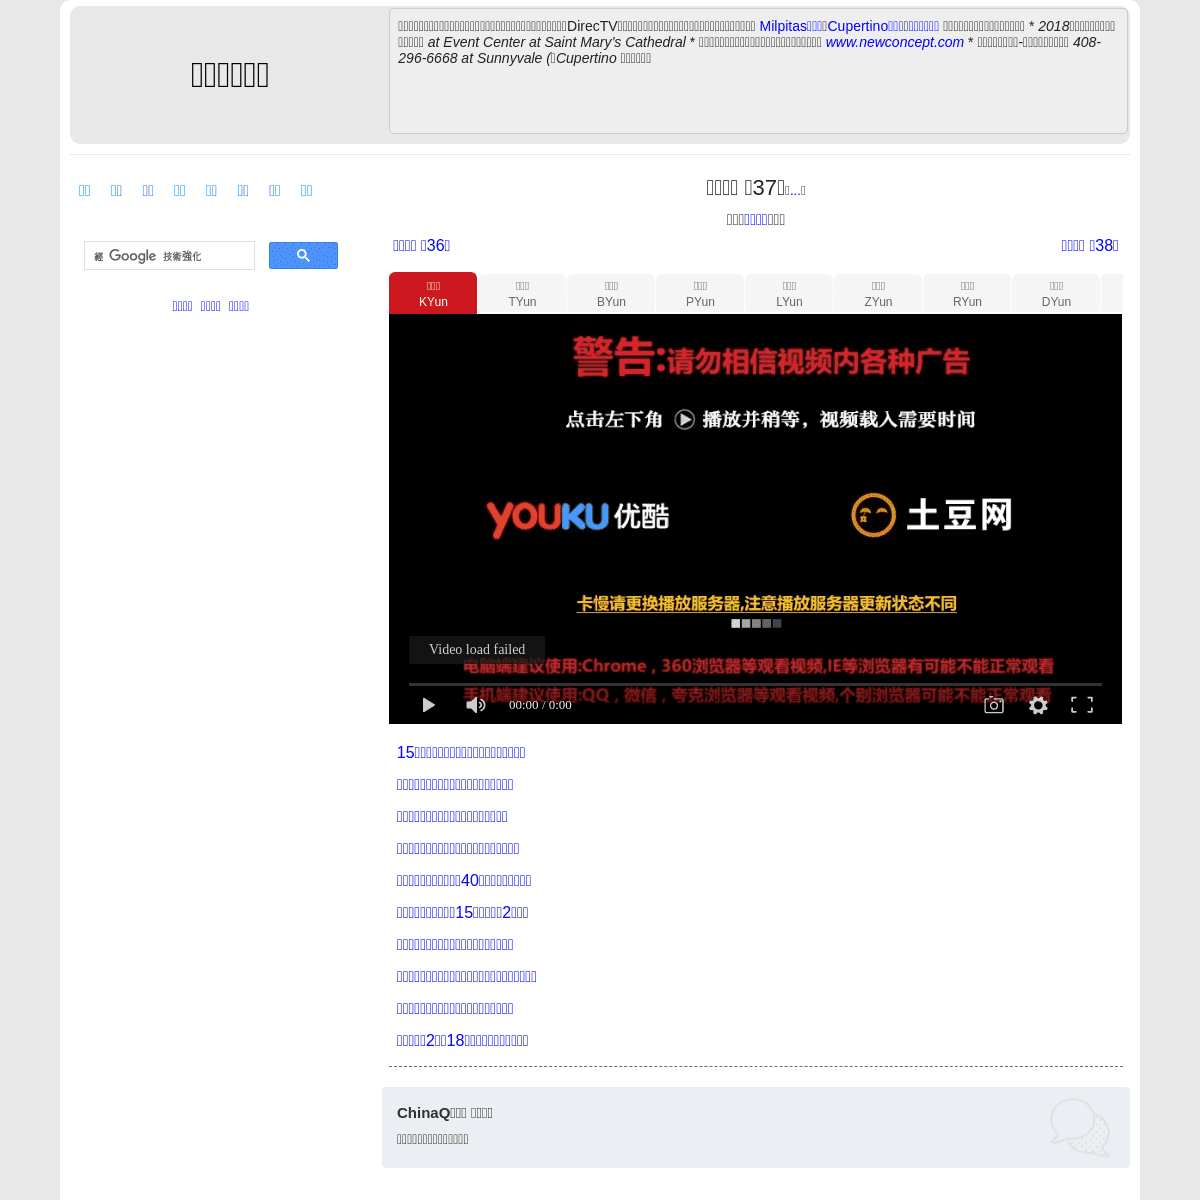 A complete backup of https://chinaq.me/cn201226b/37.html